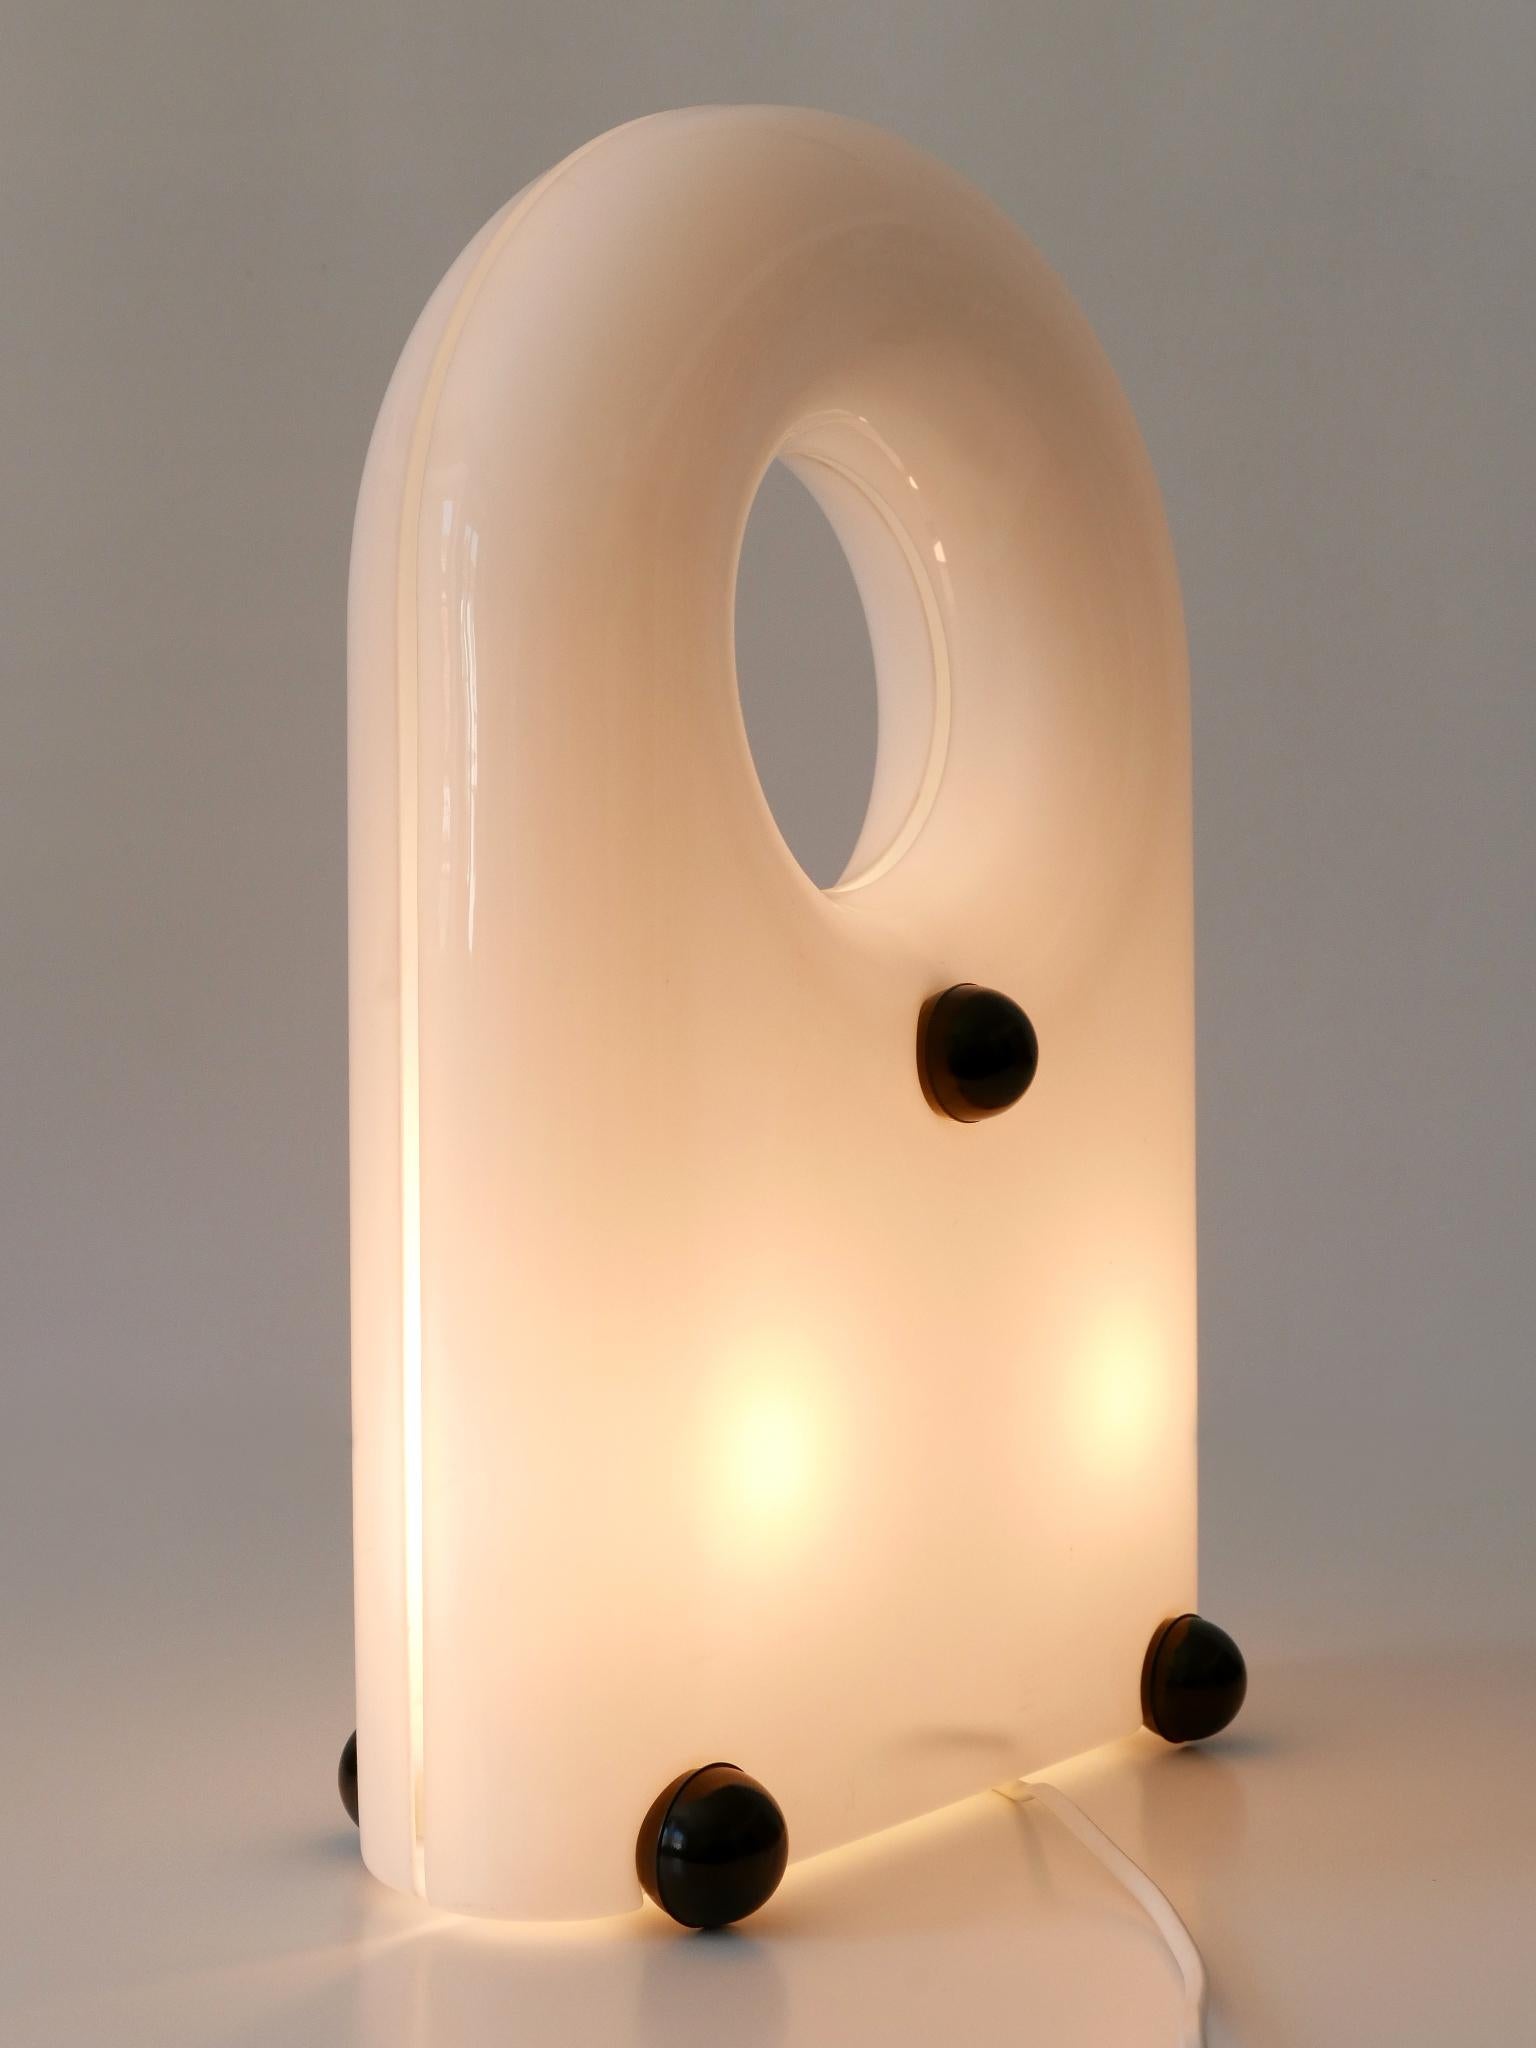 Extremely Rare Lucite Table Lamp or Floor Light by Elio Martinelli 1969 Italy For Sale 6